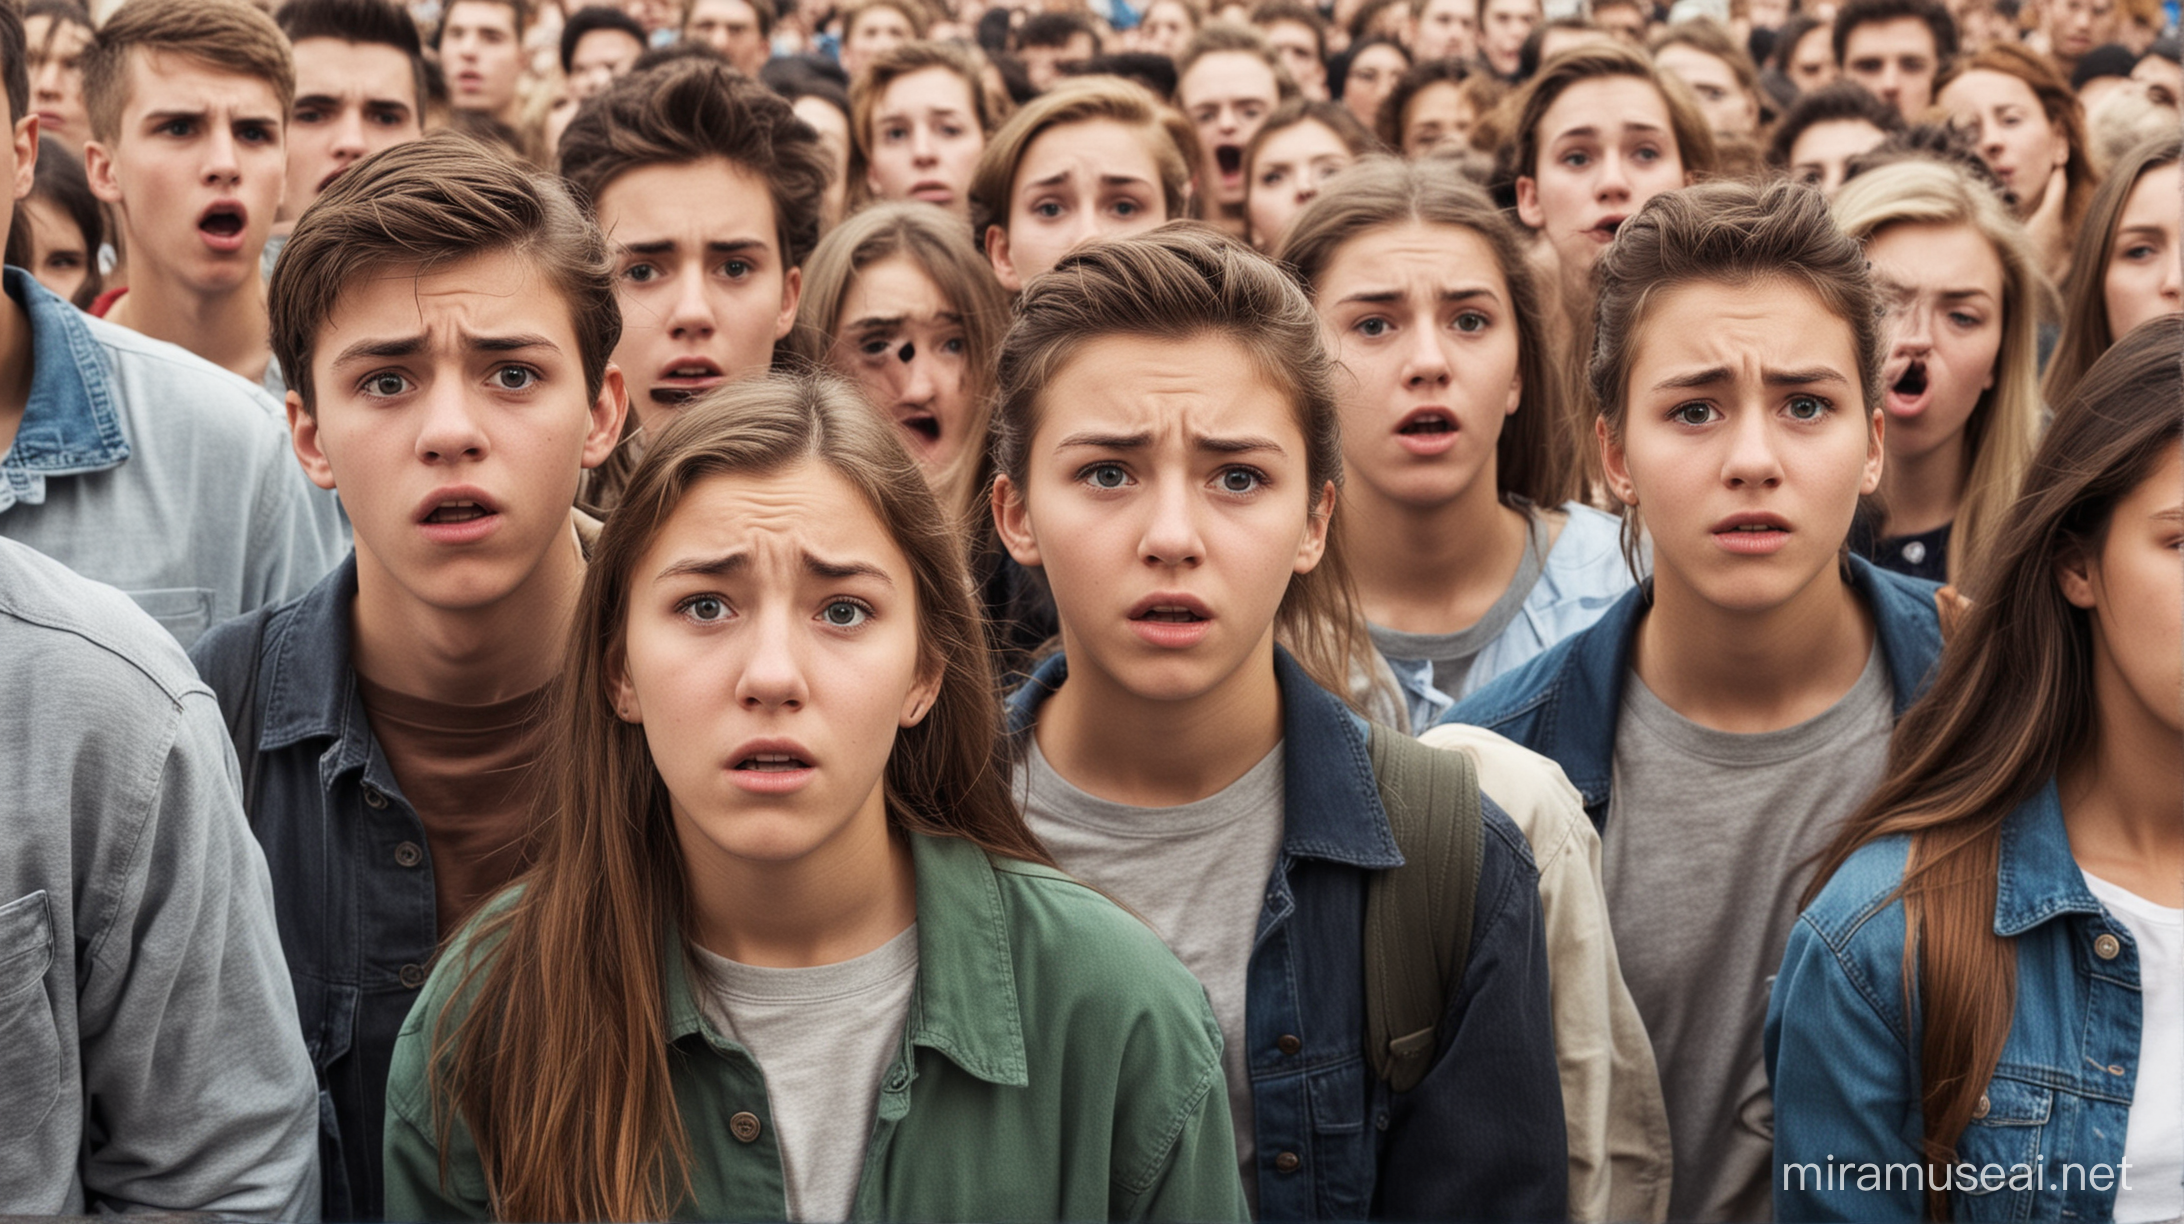 Anxious Teenagers Standing in a Crowd